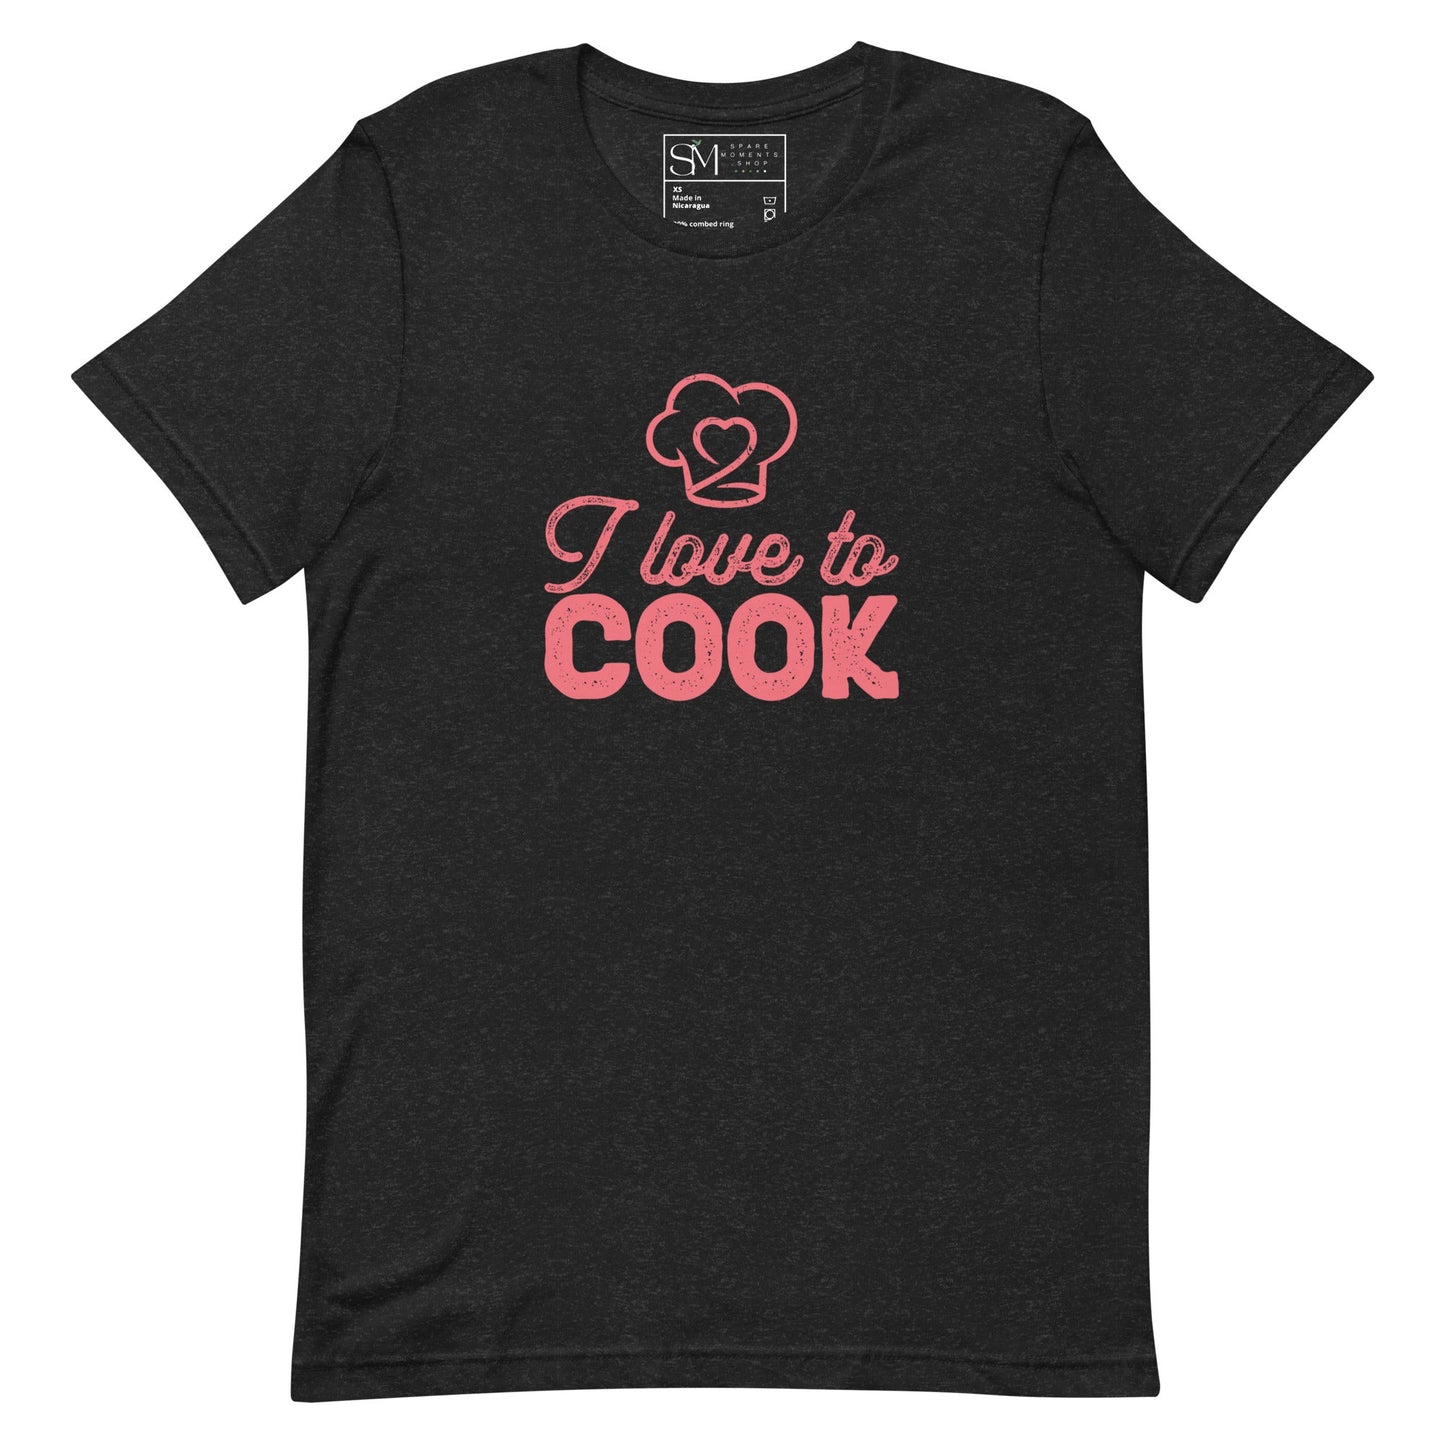 I LOVE TO COOK | Unisex t-shirt